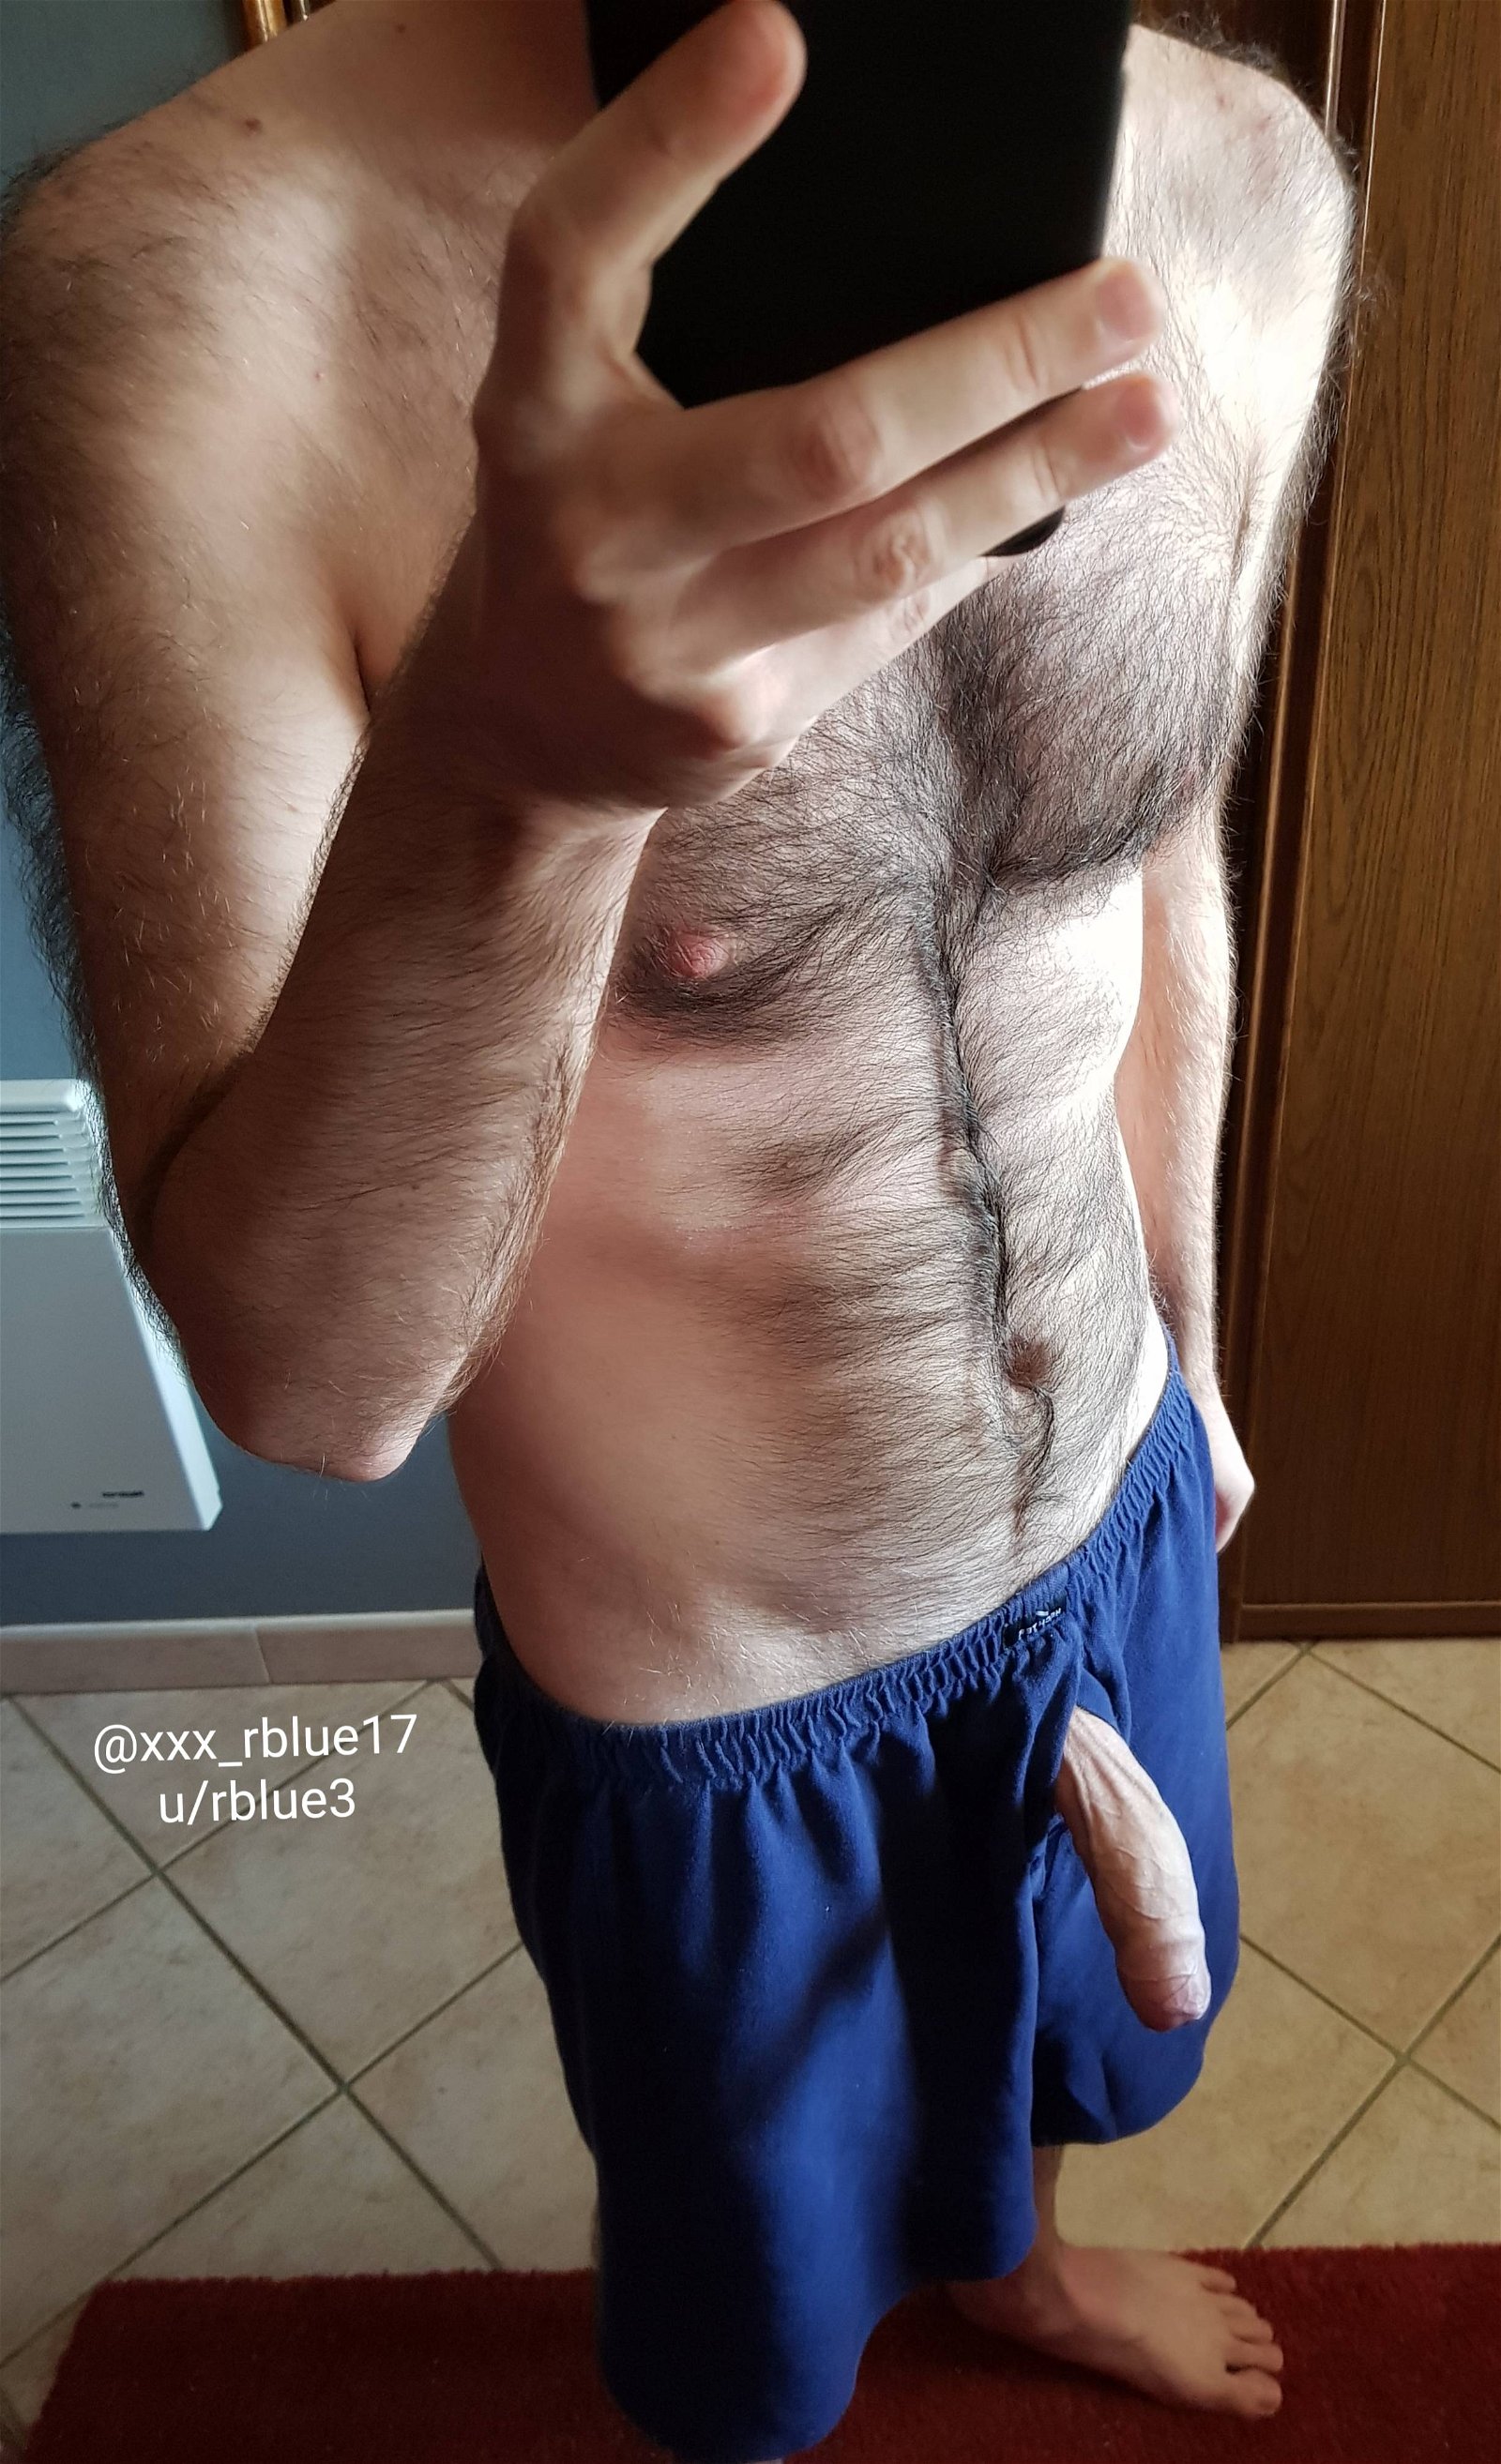 Watch the Photo by rblue with the username @rblue17, posted on October 18, 2019. The post is about the topic GayExTumblr. and the text says 'These pyjama pants come with Easy Dick Access™ technology. https://i.imgur.com/7YuQtqf.jpg'